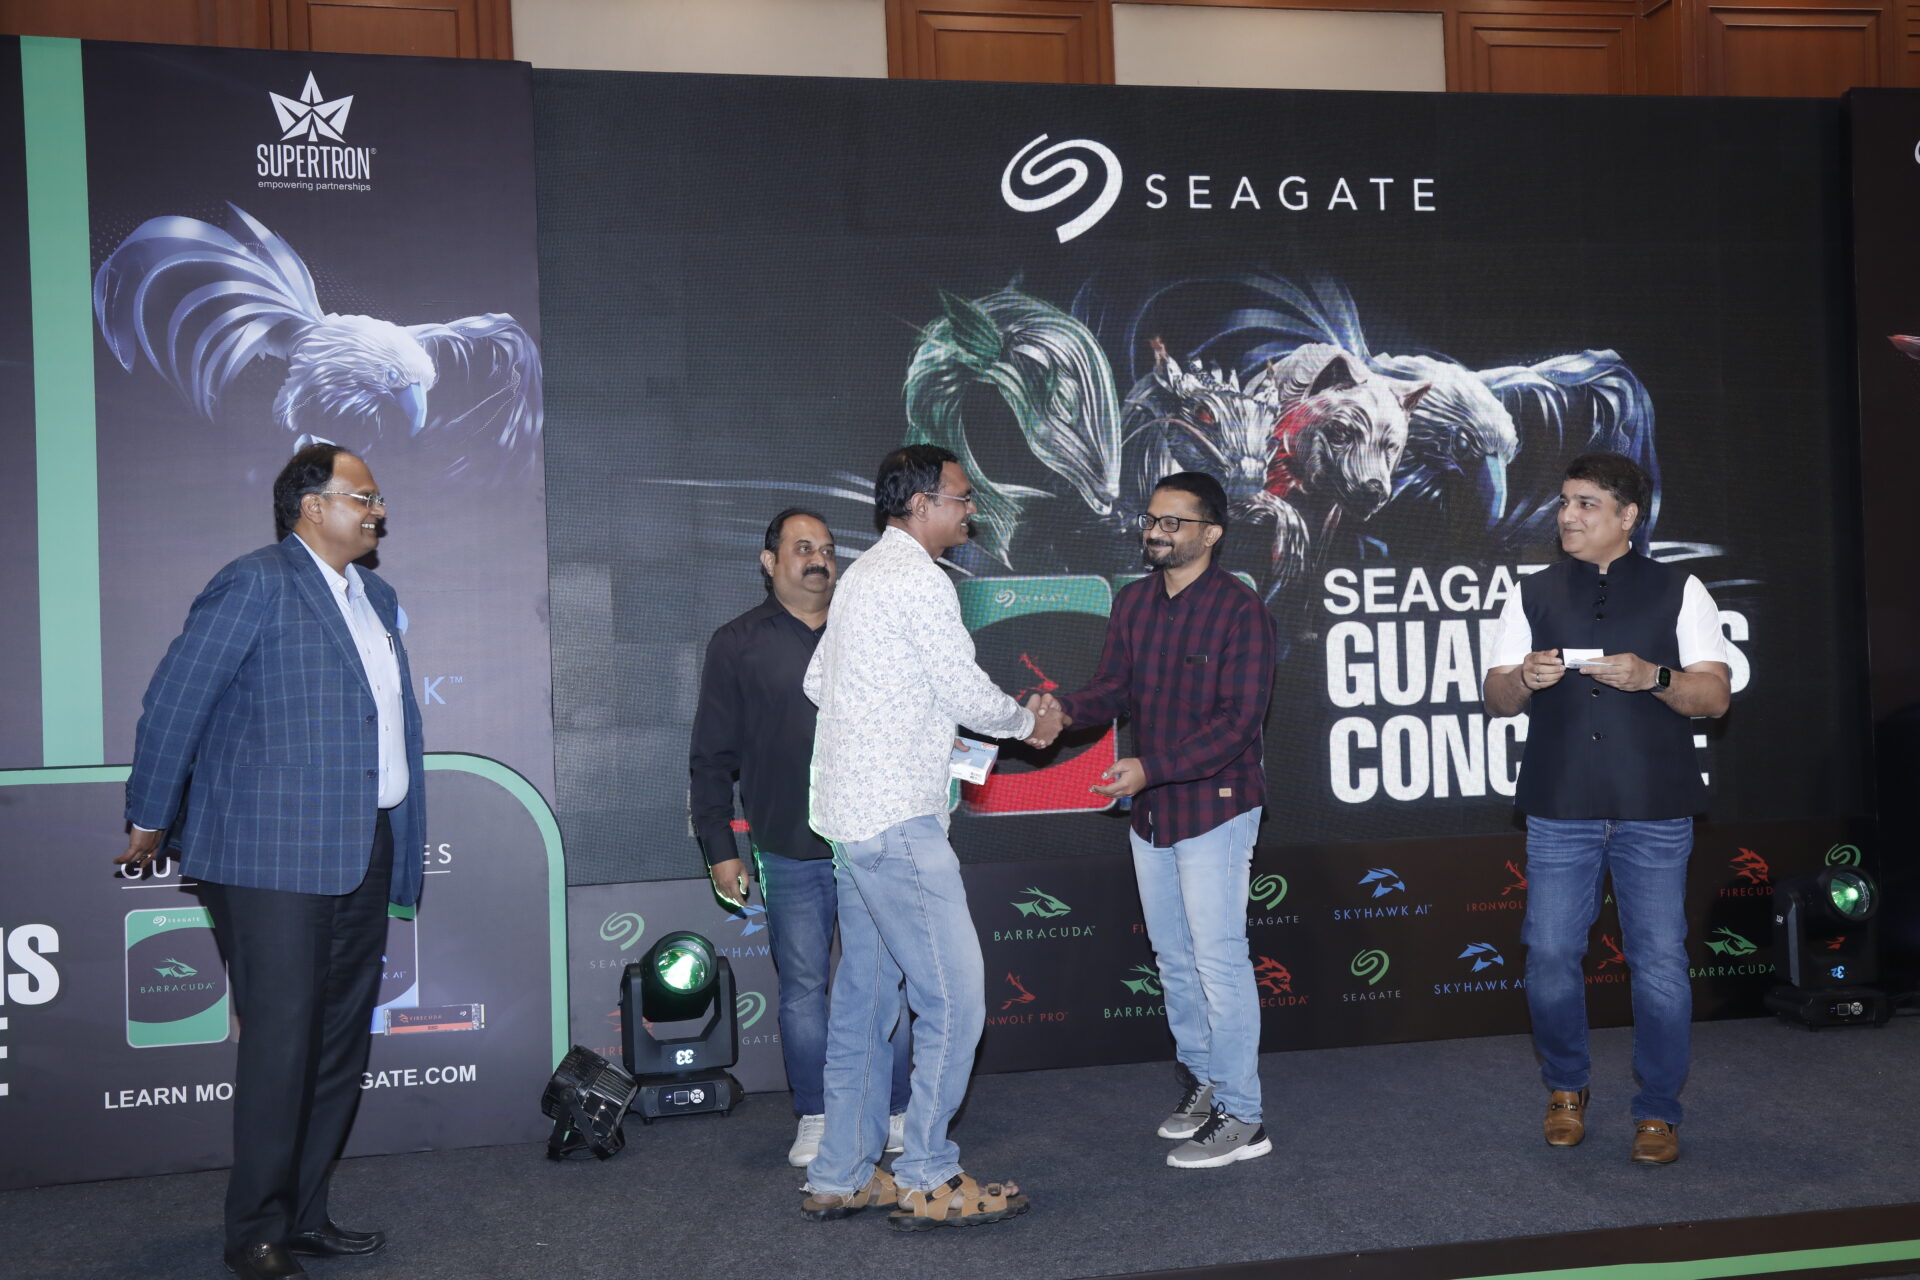 dealers-meet-event-management-done-by- ad-vantage-for-seagate